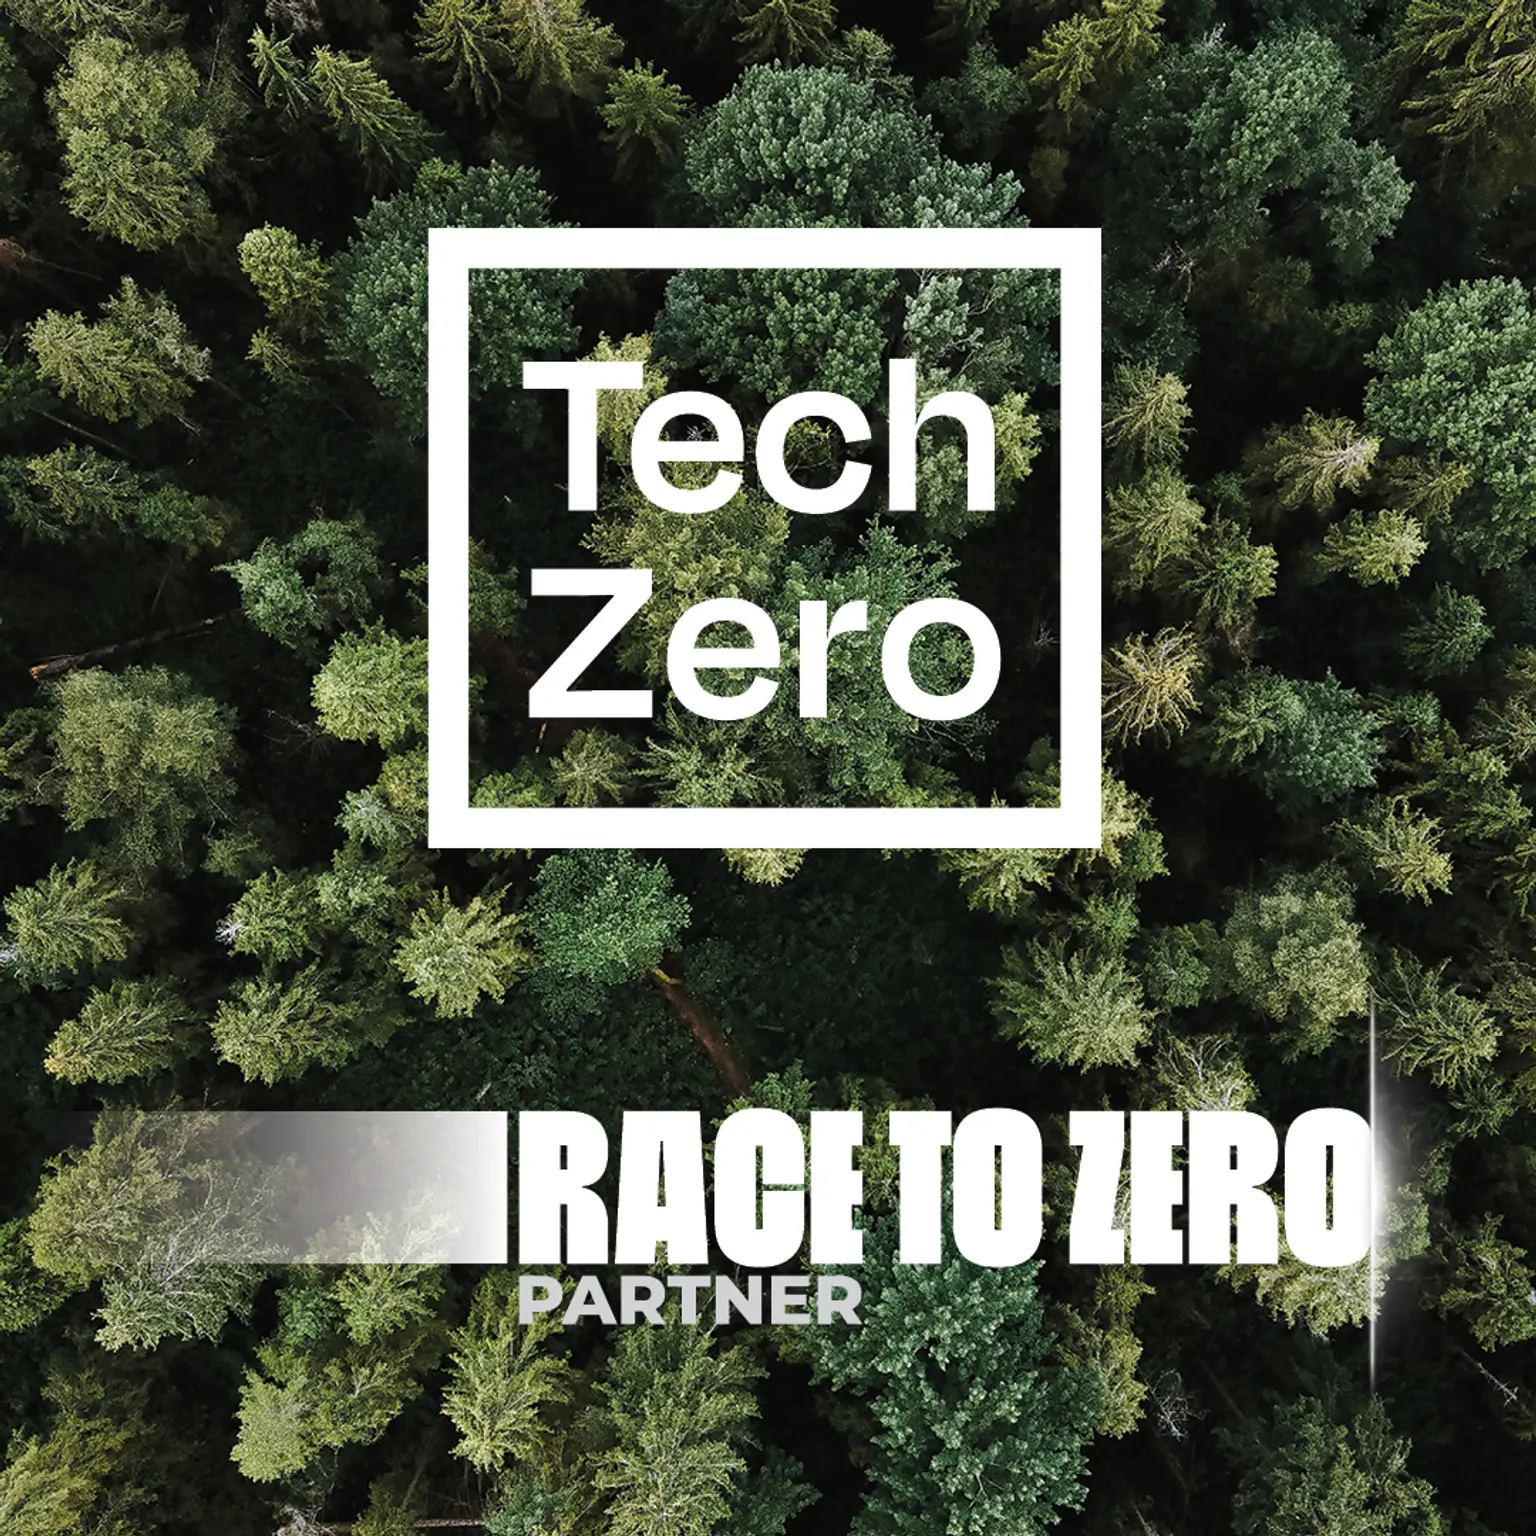 ethy has joined Tech Zero, a group of over 300 tech companies who are joining forces to accelerate progress to net zero, support tech companies in making a climate action plan and use tech to help the customers they serve live more sustainably.